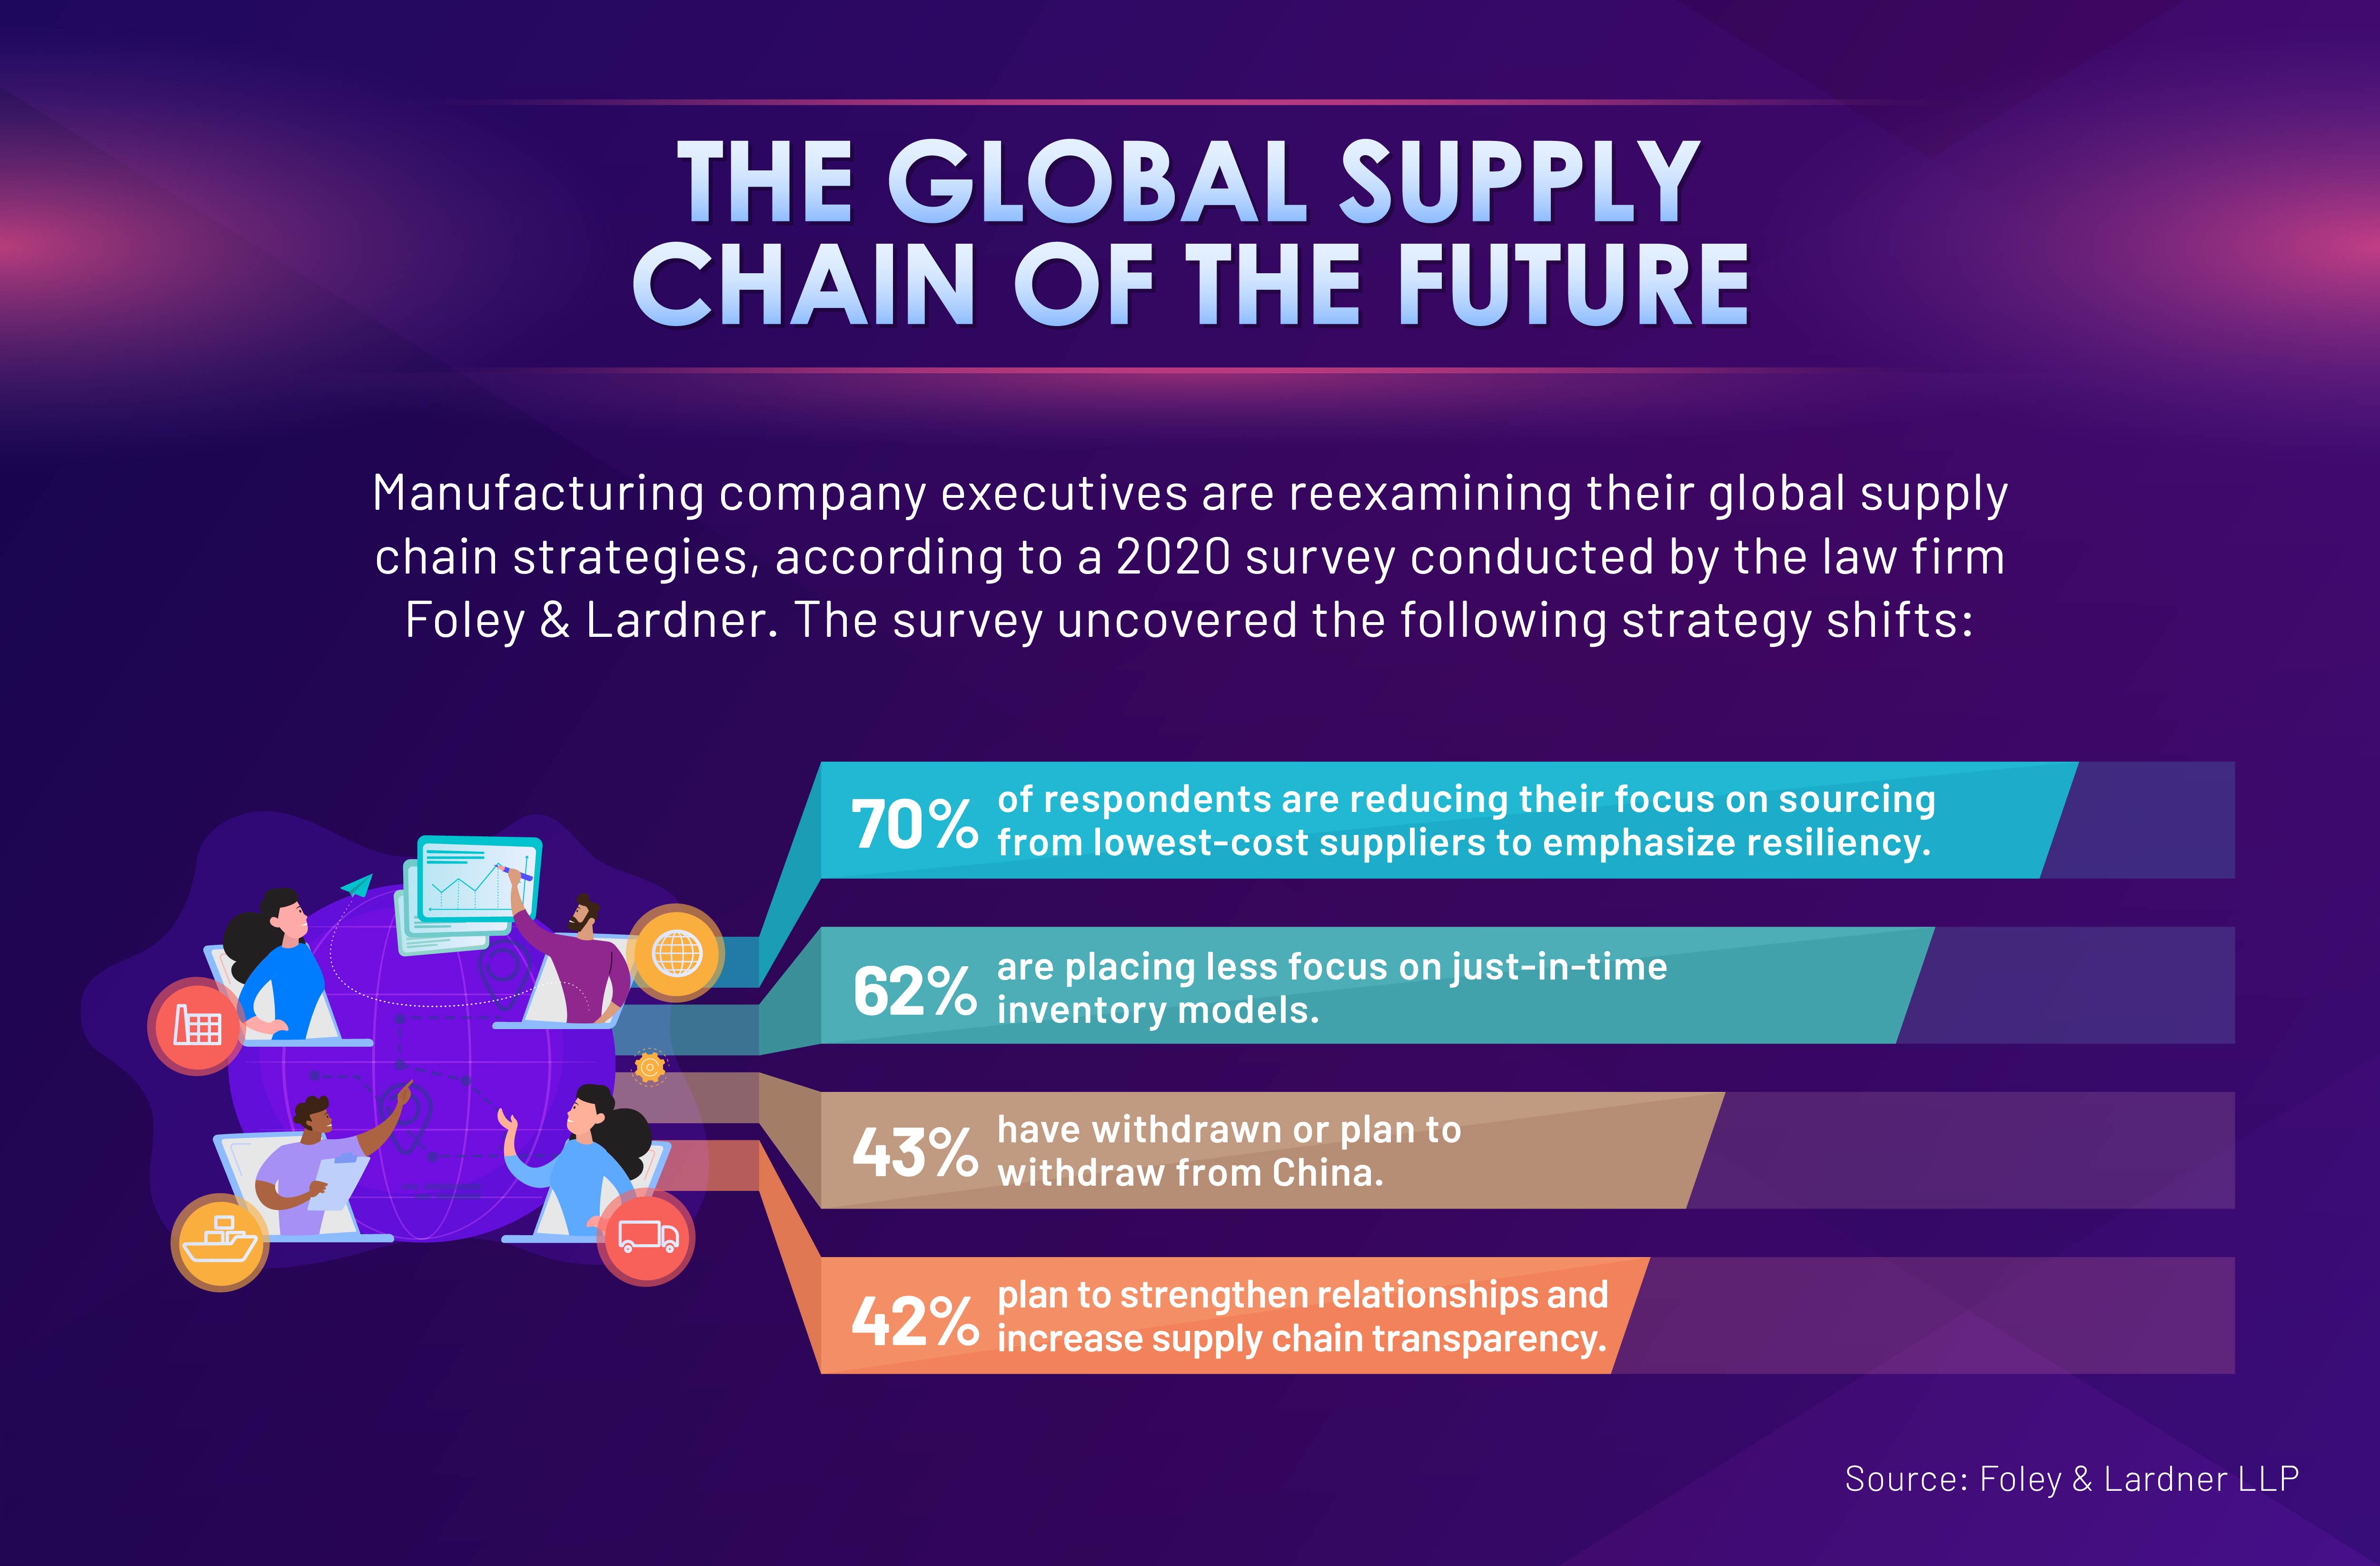 Future shifts in manufacturers’ supply chain strategies.